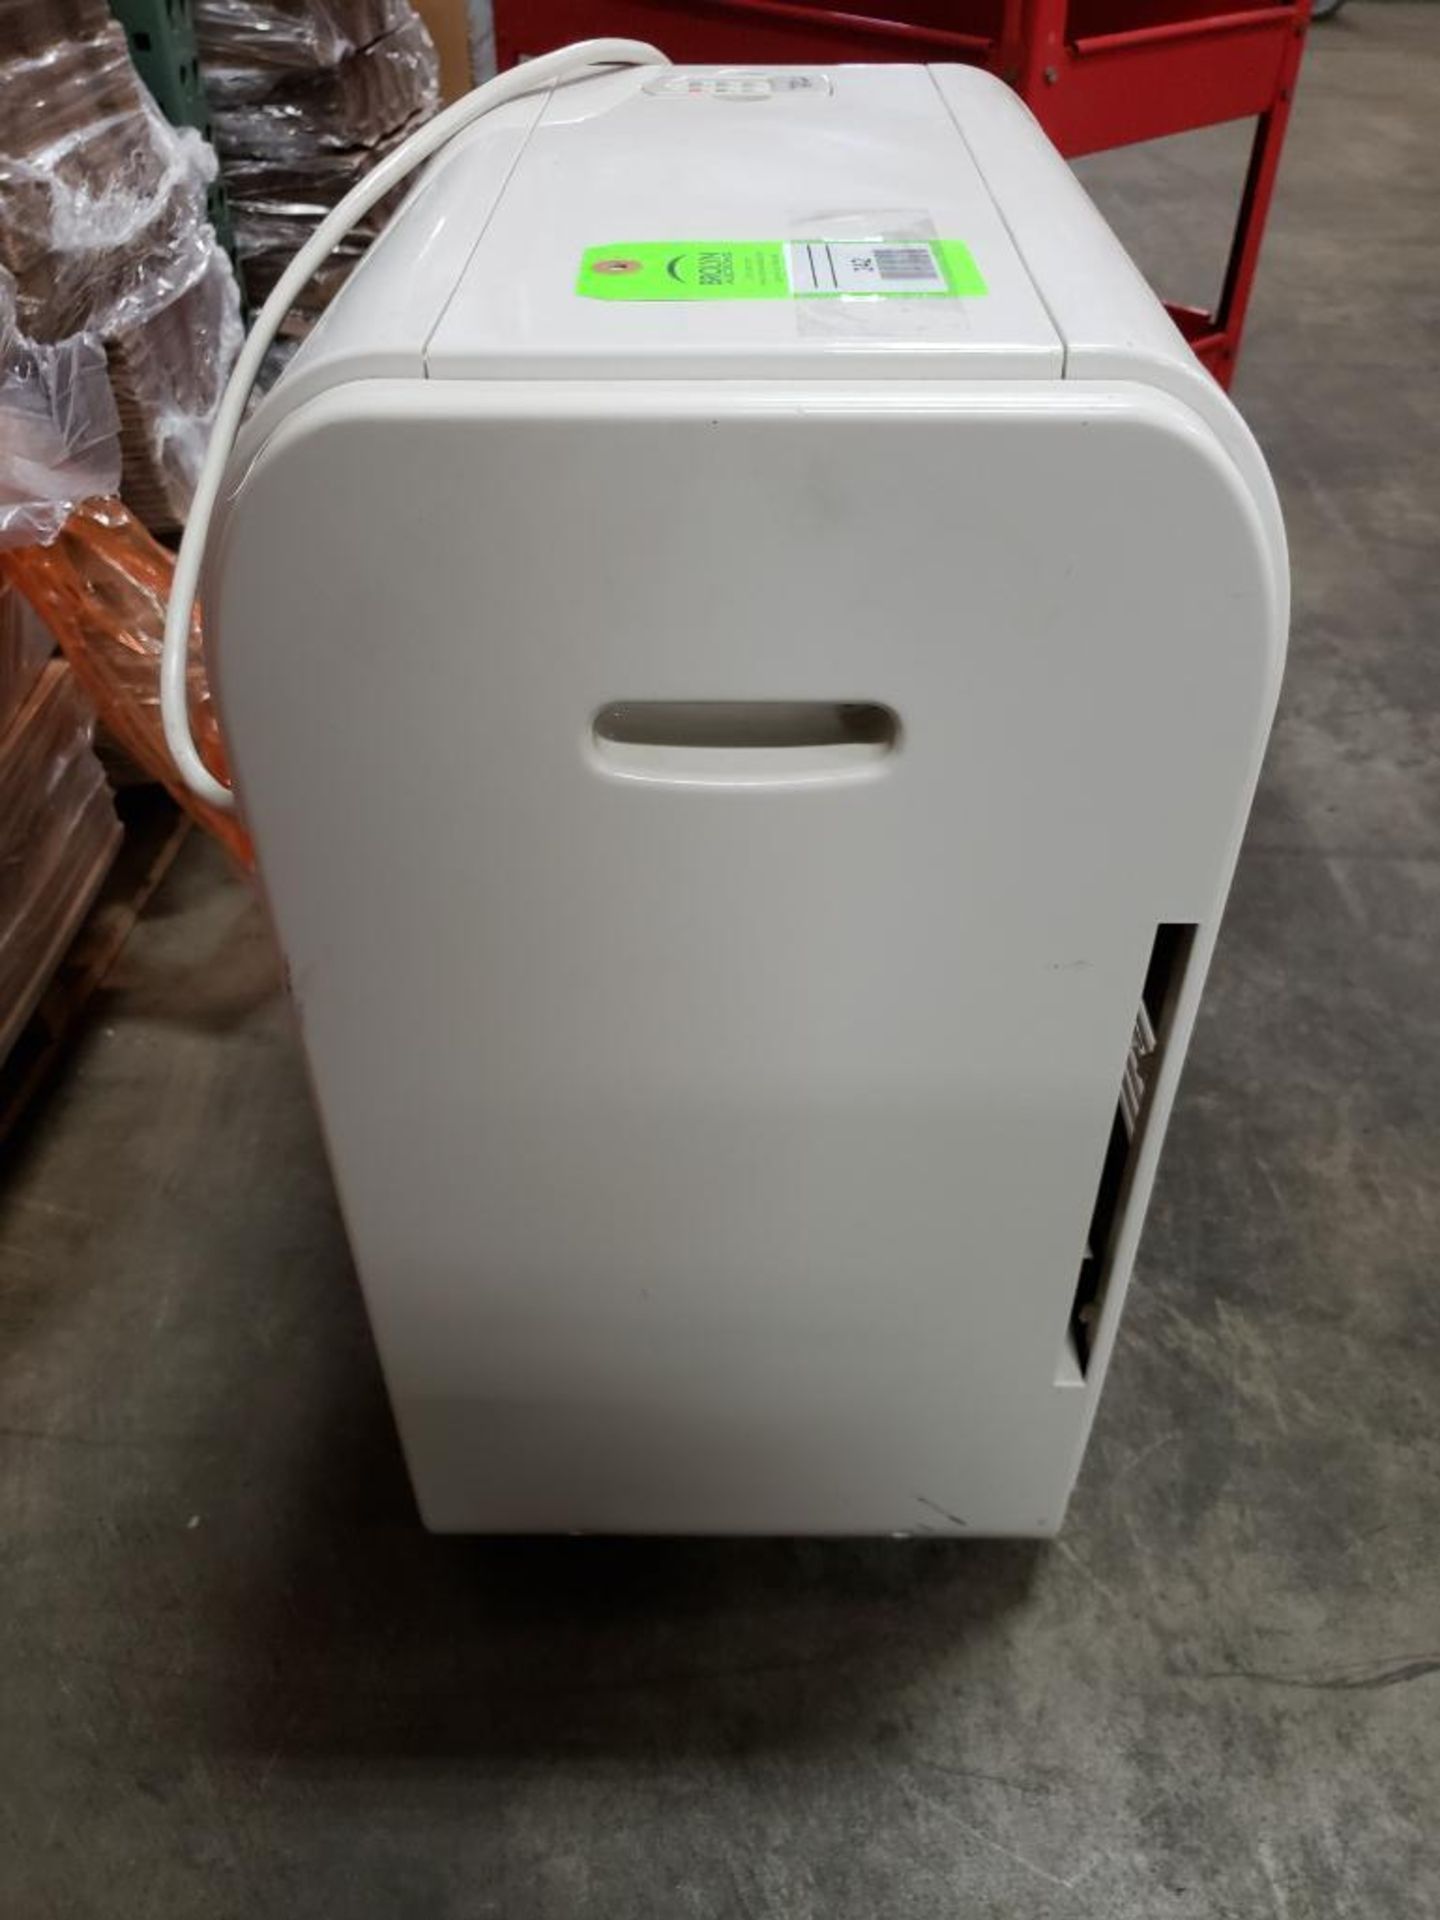 Commercial Cool room air conditioner CPRB08XCX-LW. 115VAC, 8000BTU. - Image 6 of 9